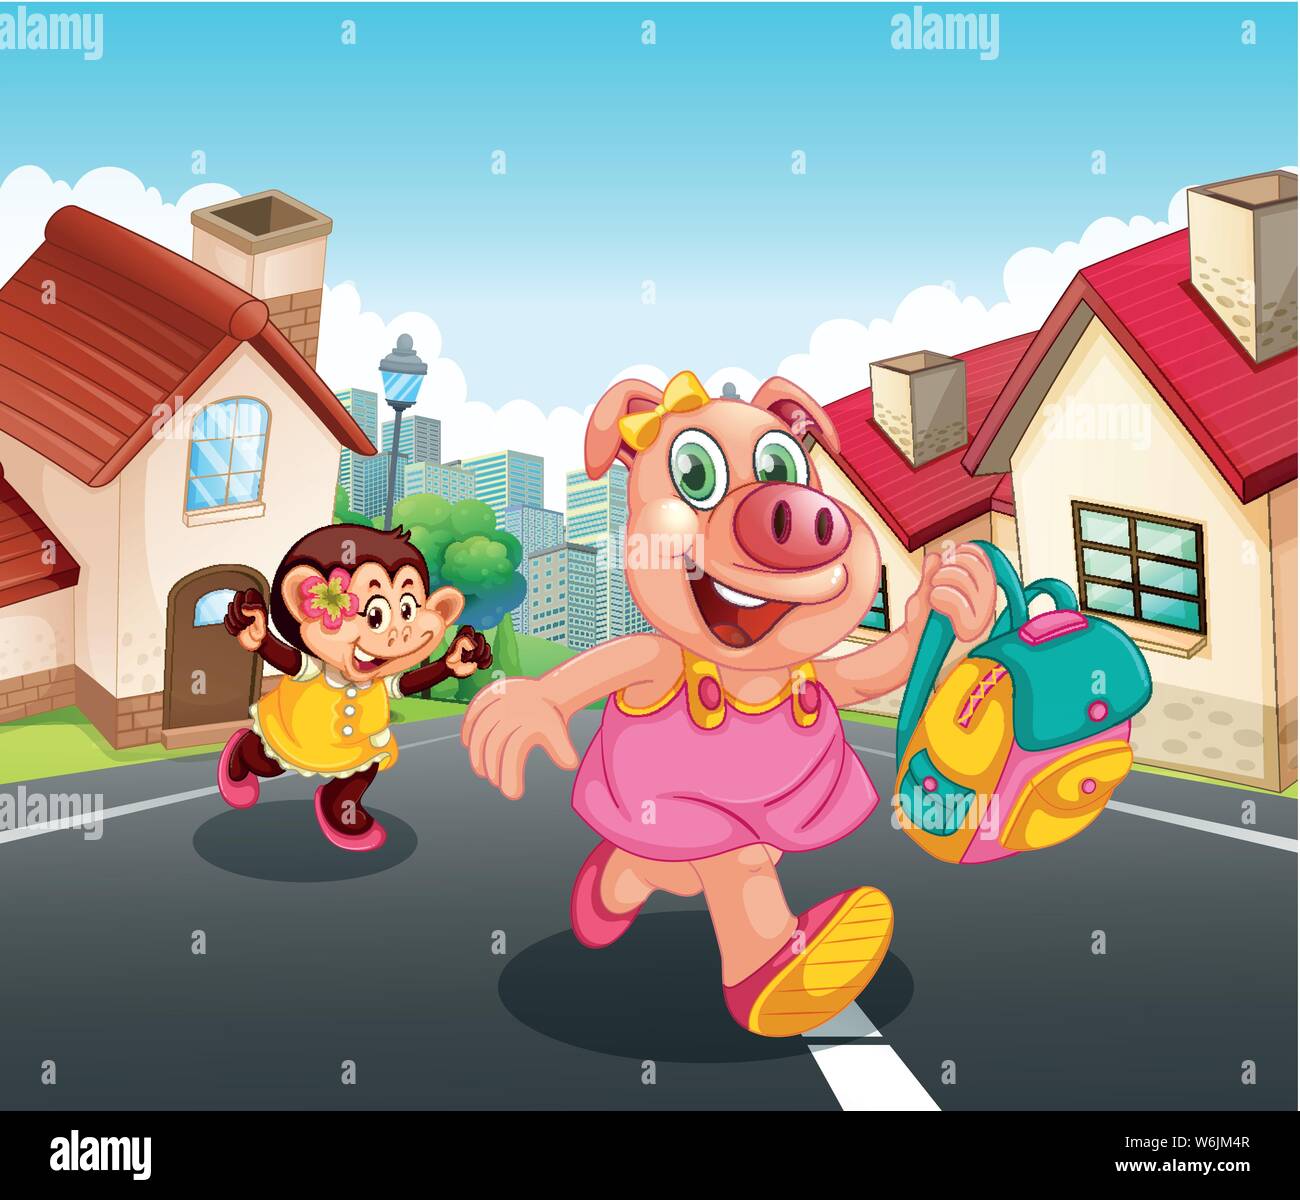 Pig and monkey running on road illustration Stock Vector